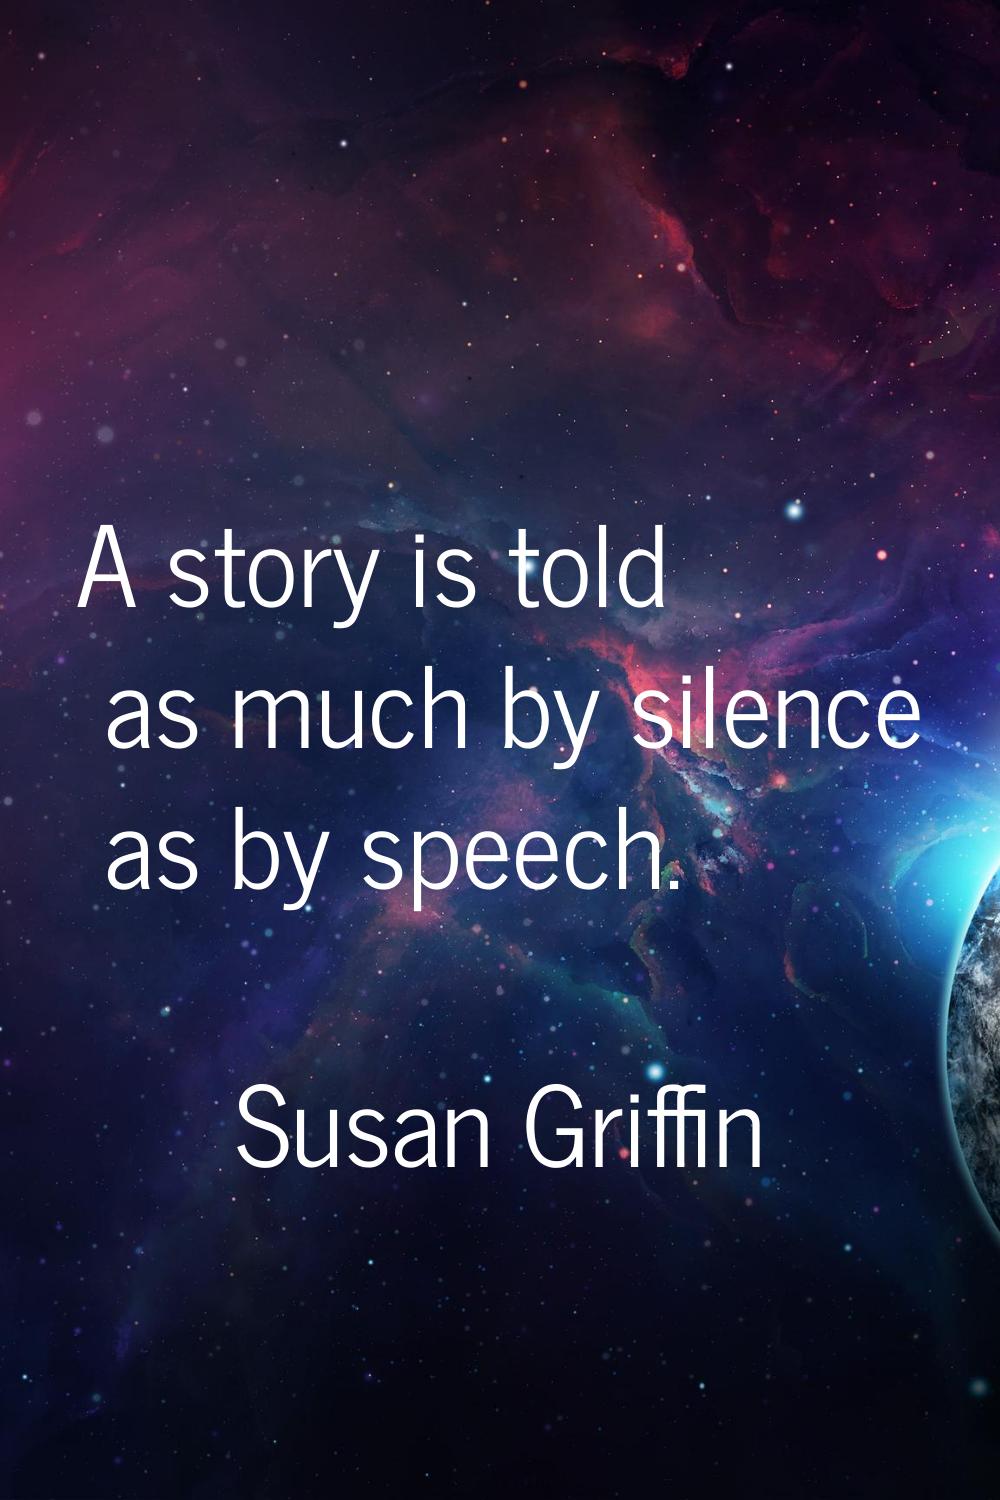 A story is told as much by silence as by speech.